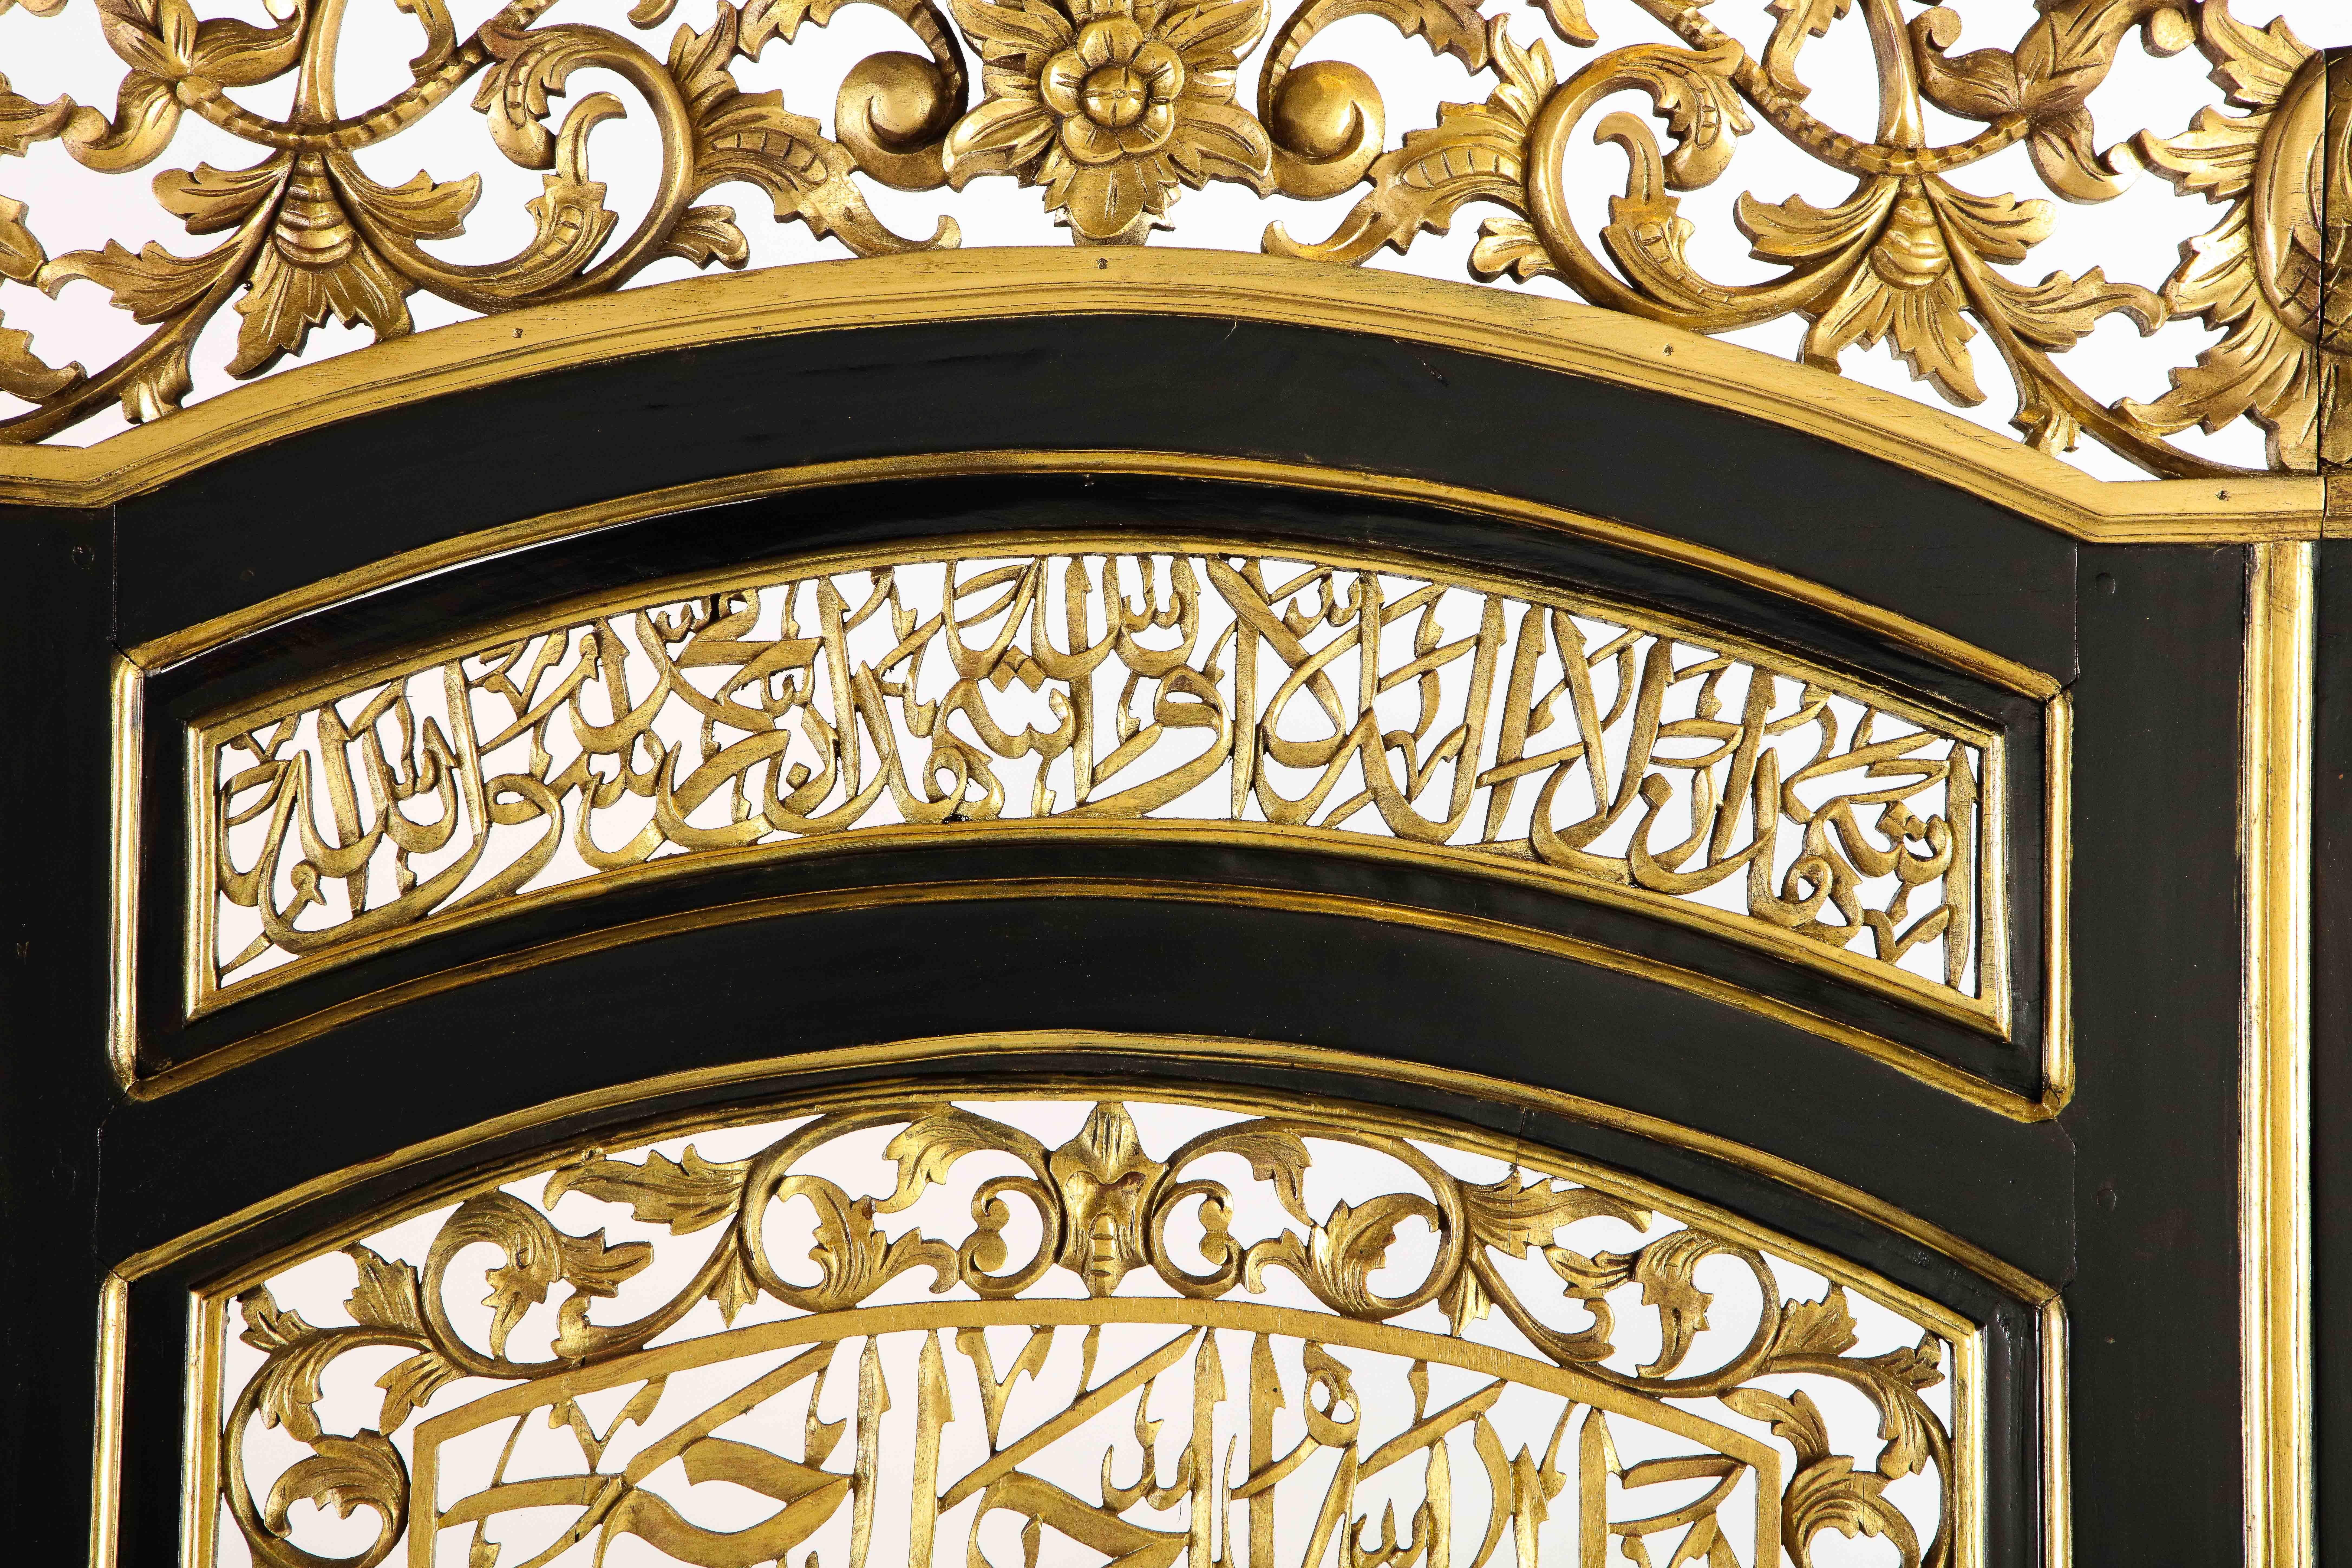 20th Century Rare and Exceptional Islamic Gilt and Ebonized Wood Three-Panel Screen